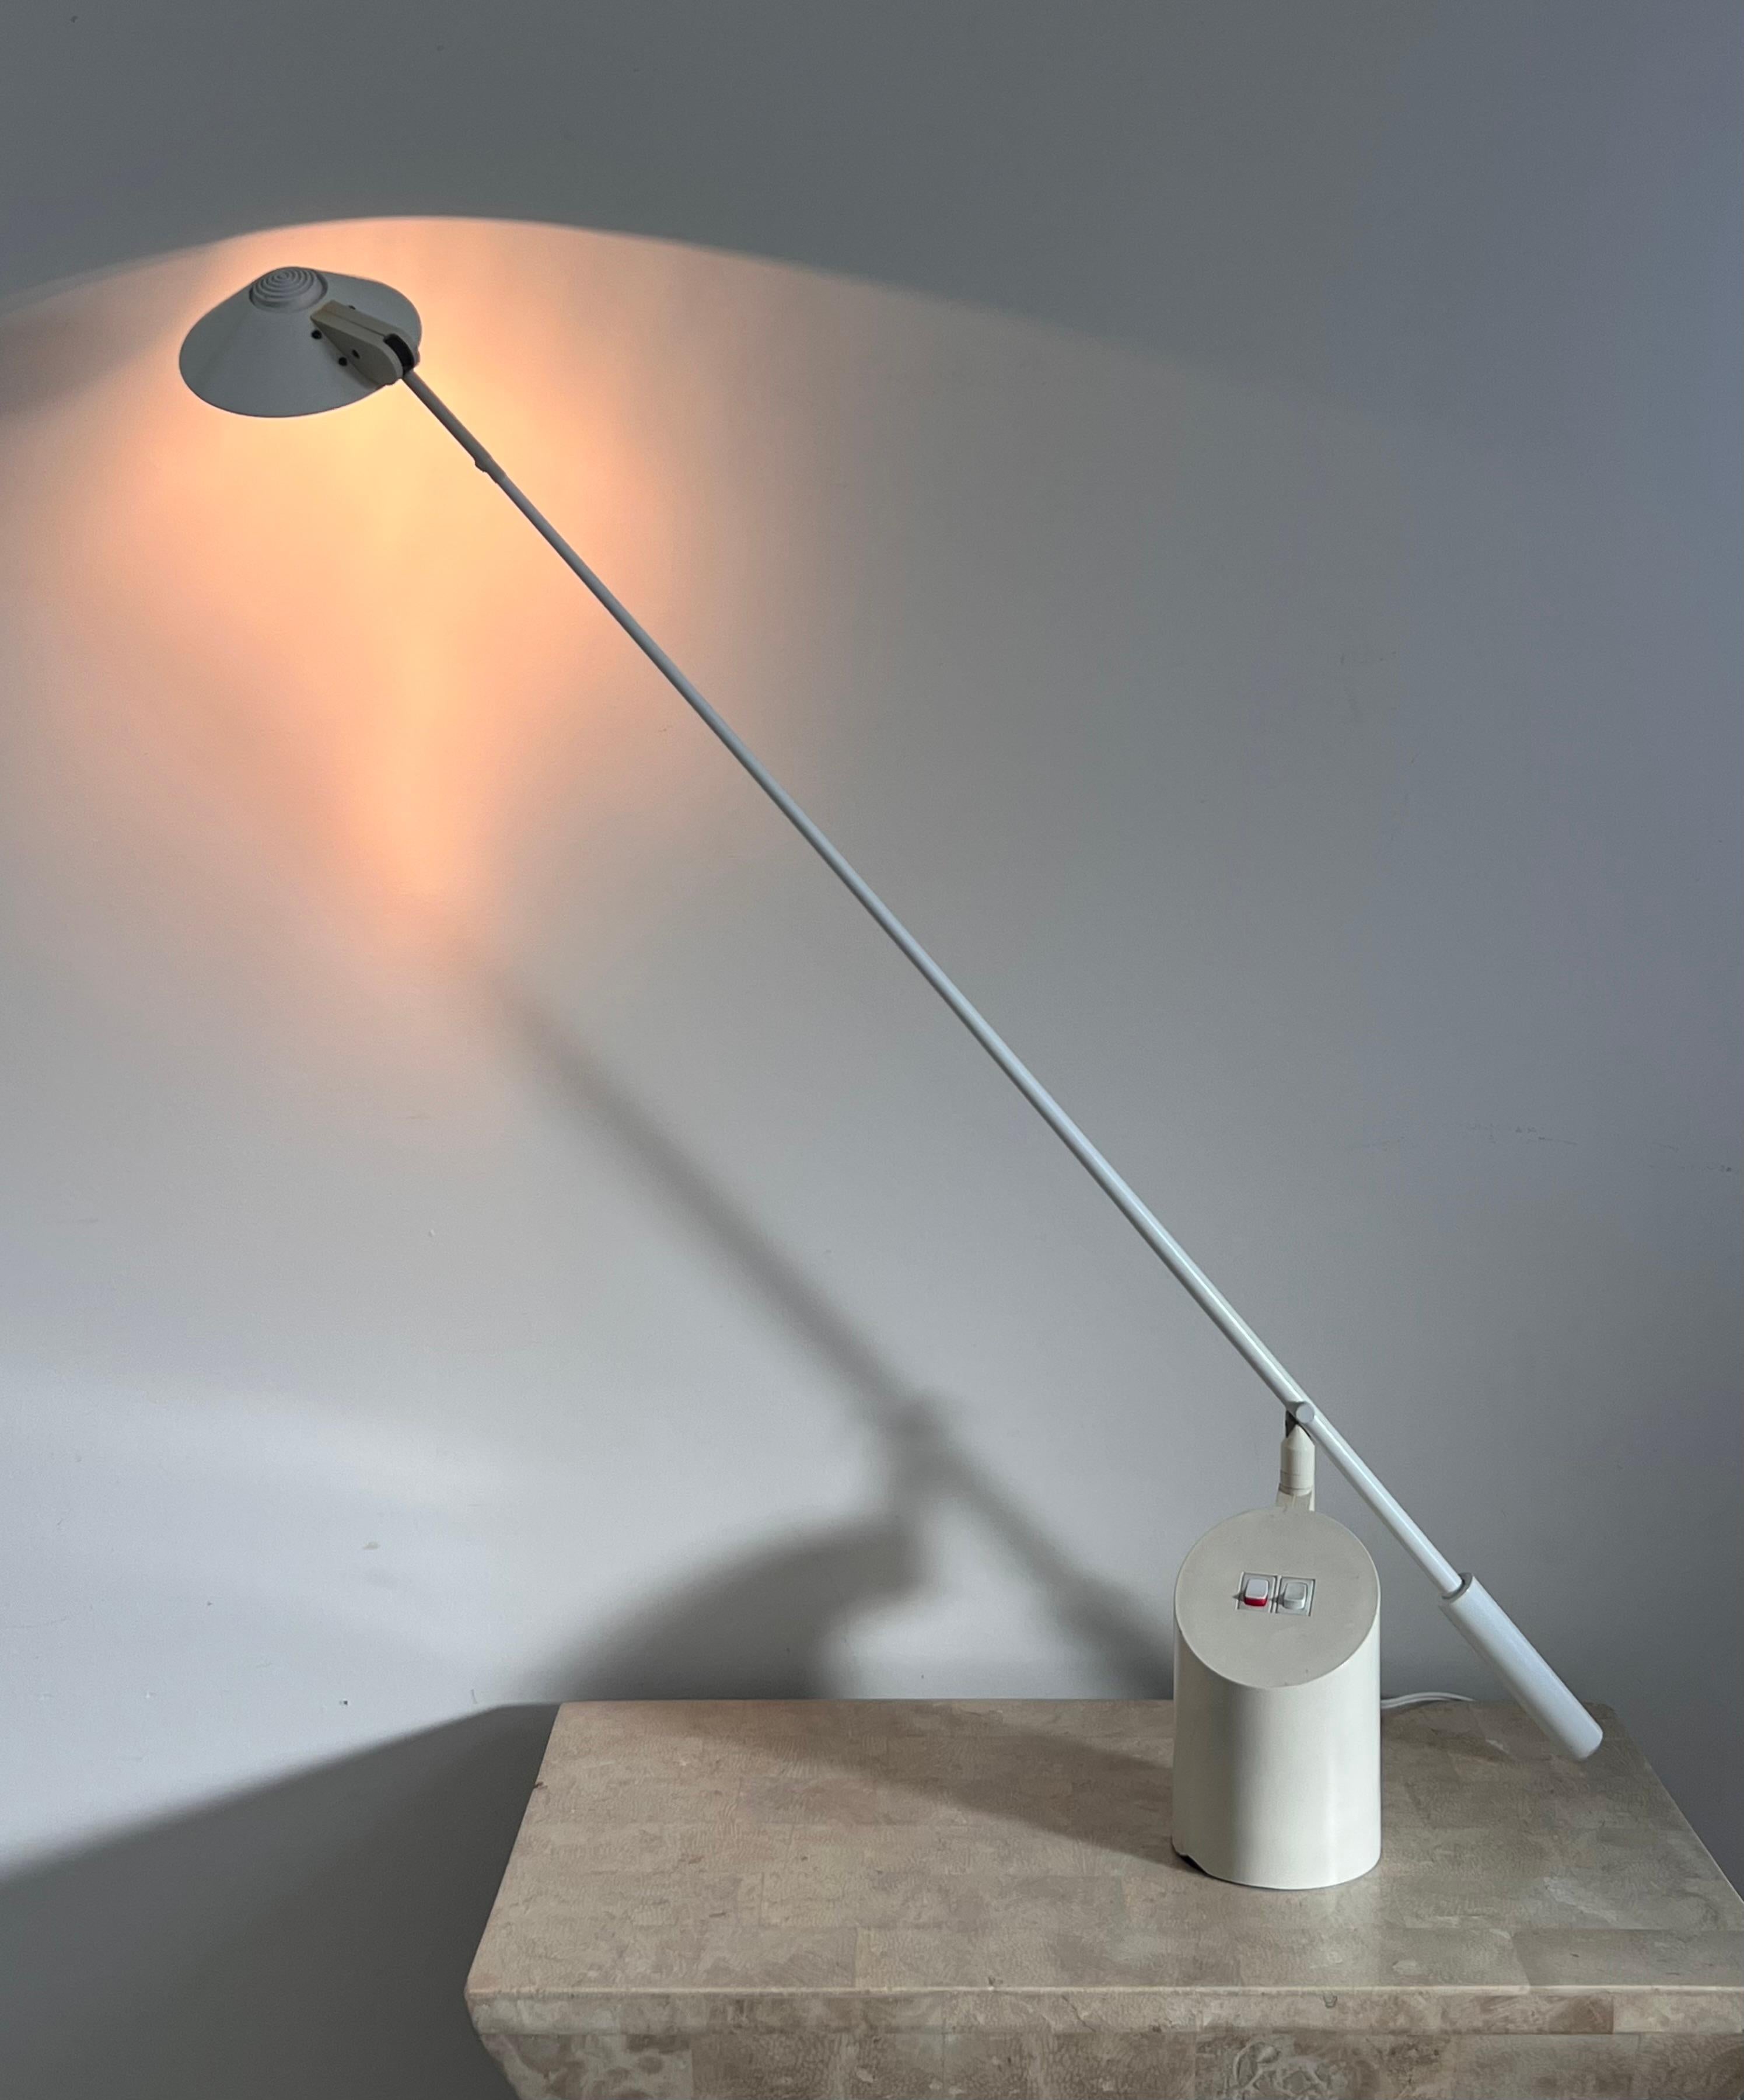 A “Feather” task lamp by Robert Sonneman for George Kovacs, 1989. Equipped with a double switch for on/off and high/low light. Original wiring; uses a 2 pin halogen bulb. Crane neck floats gracefully up and down and can circulate 360 degrees. This